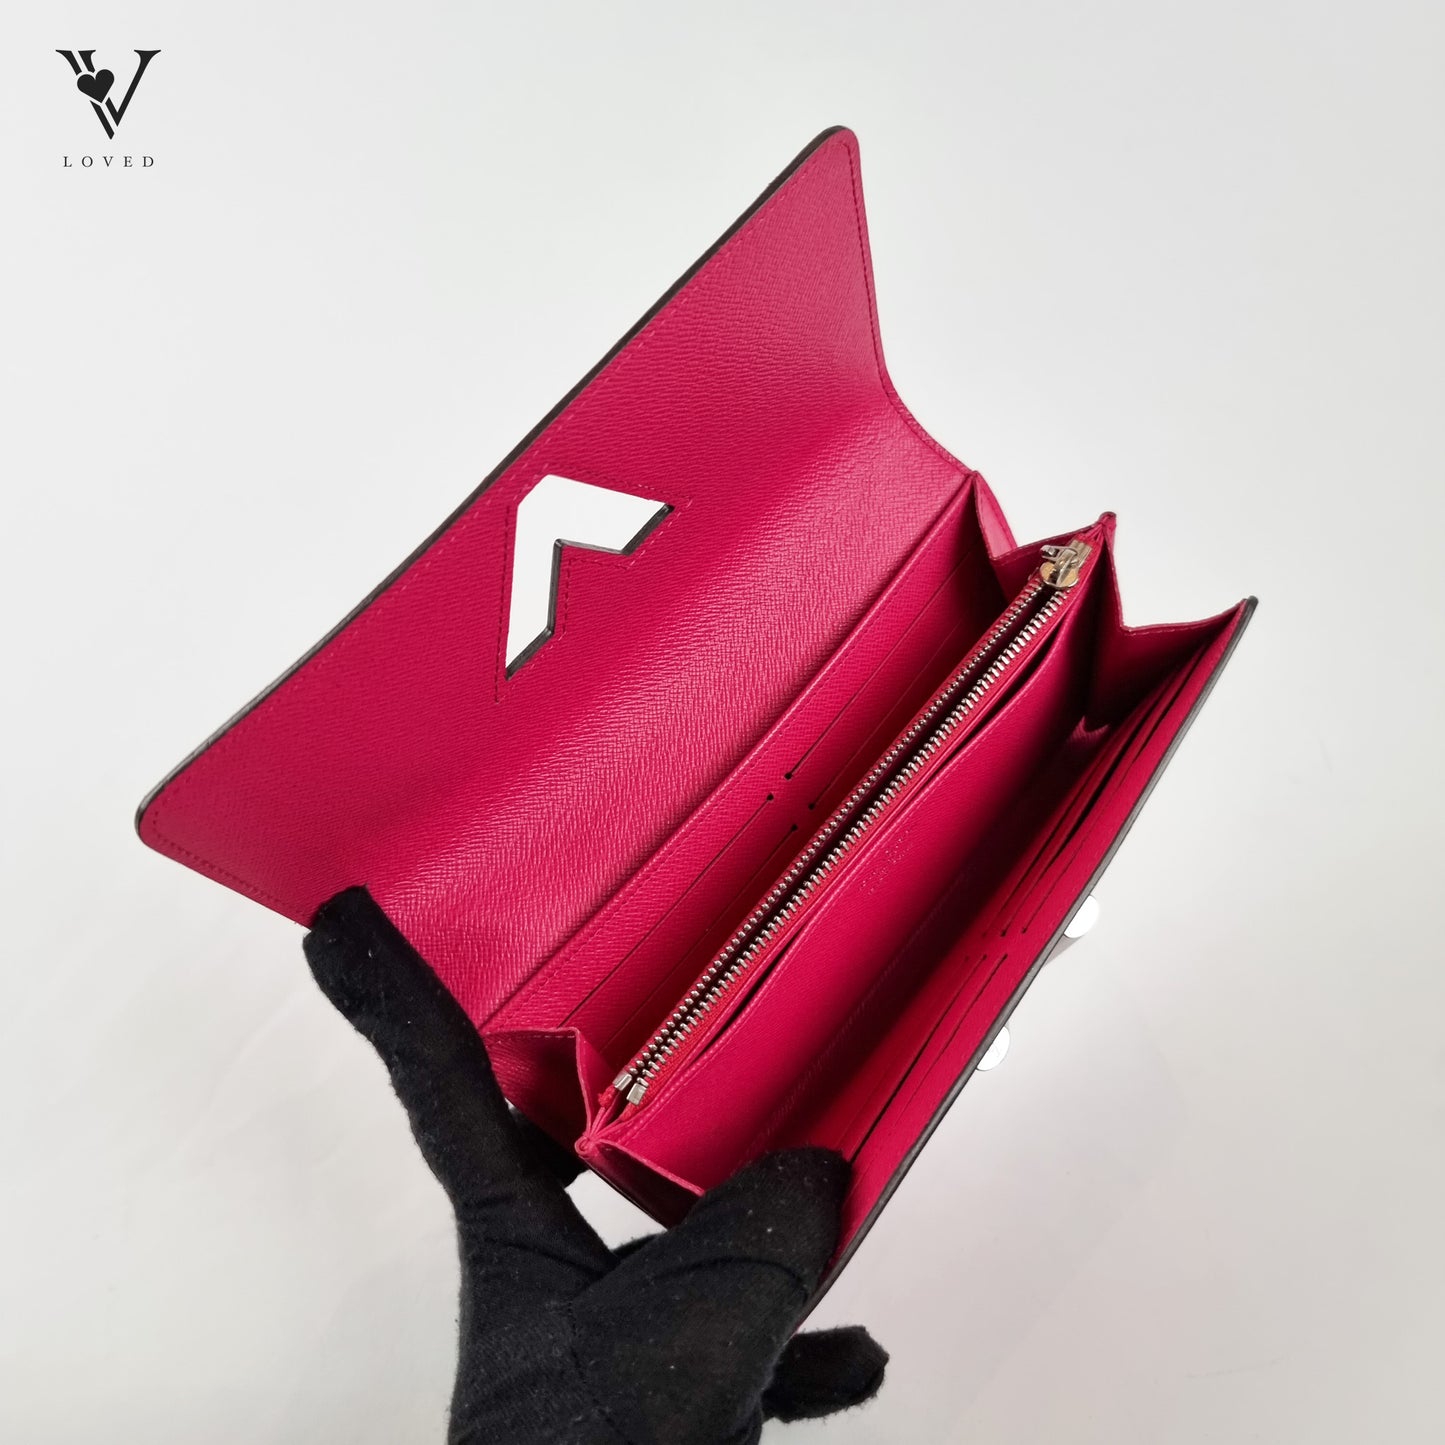 Twist Wallet in Coquelicot Epi Leather